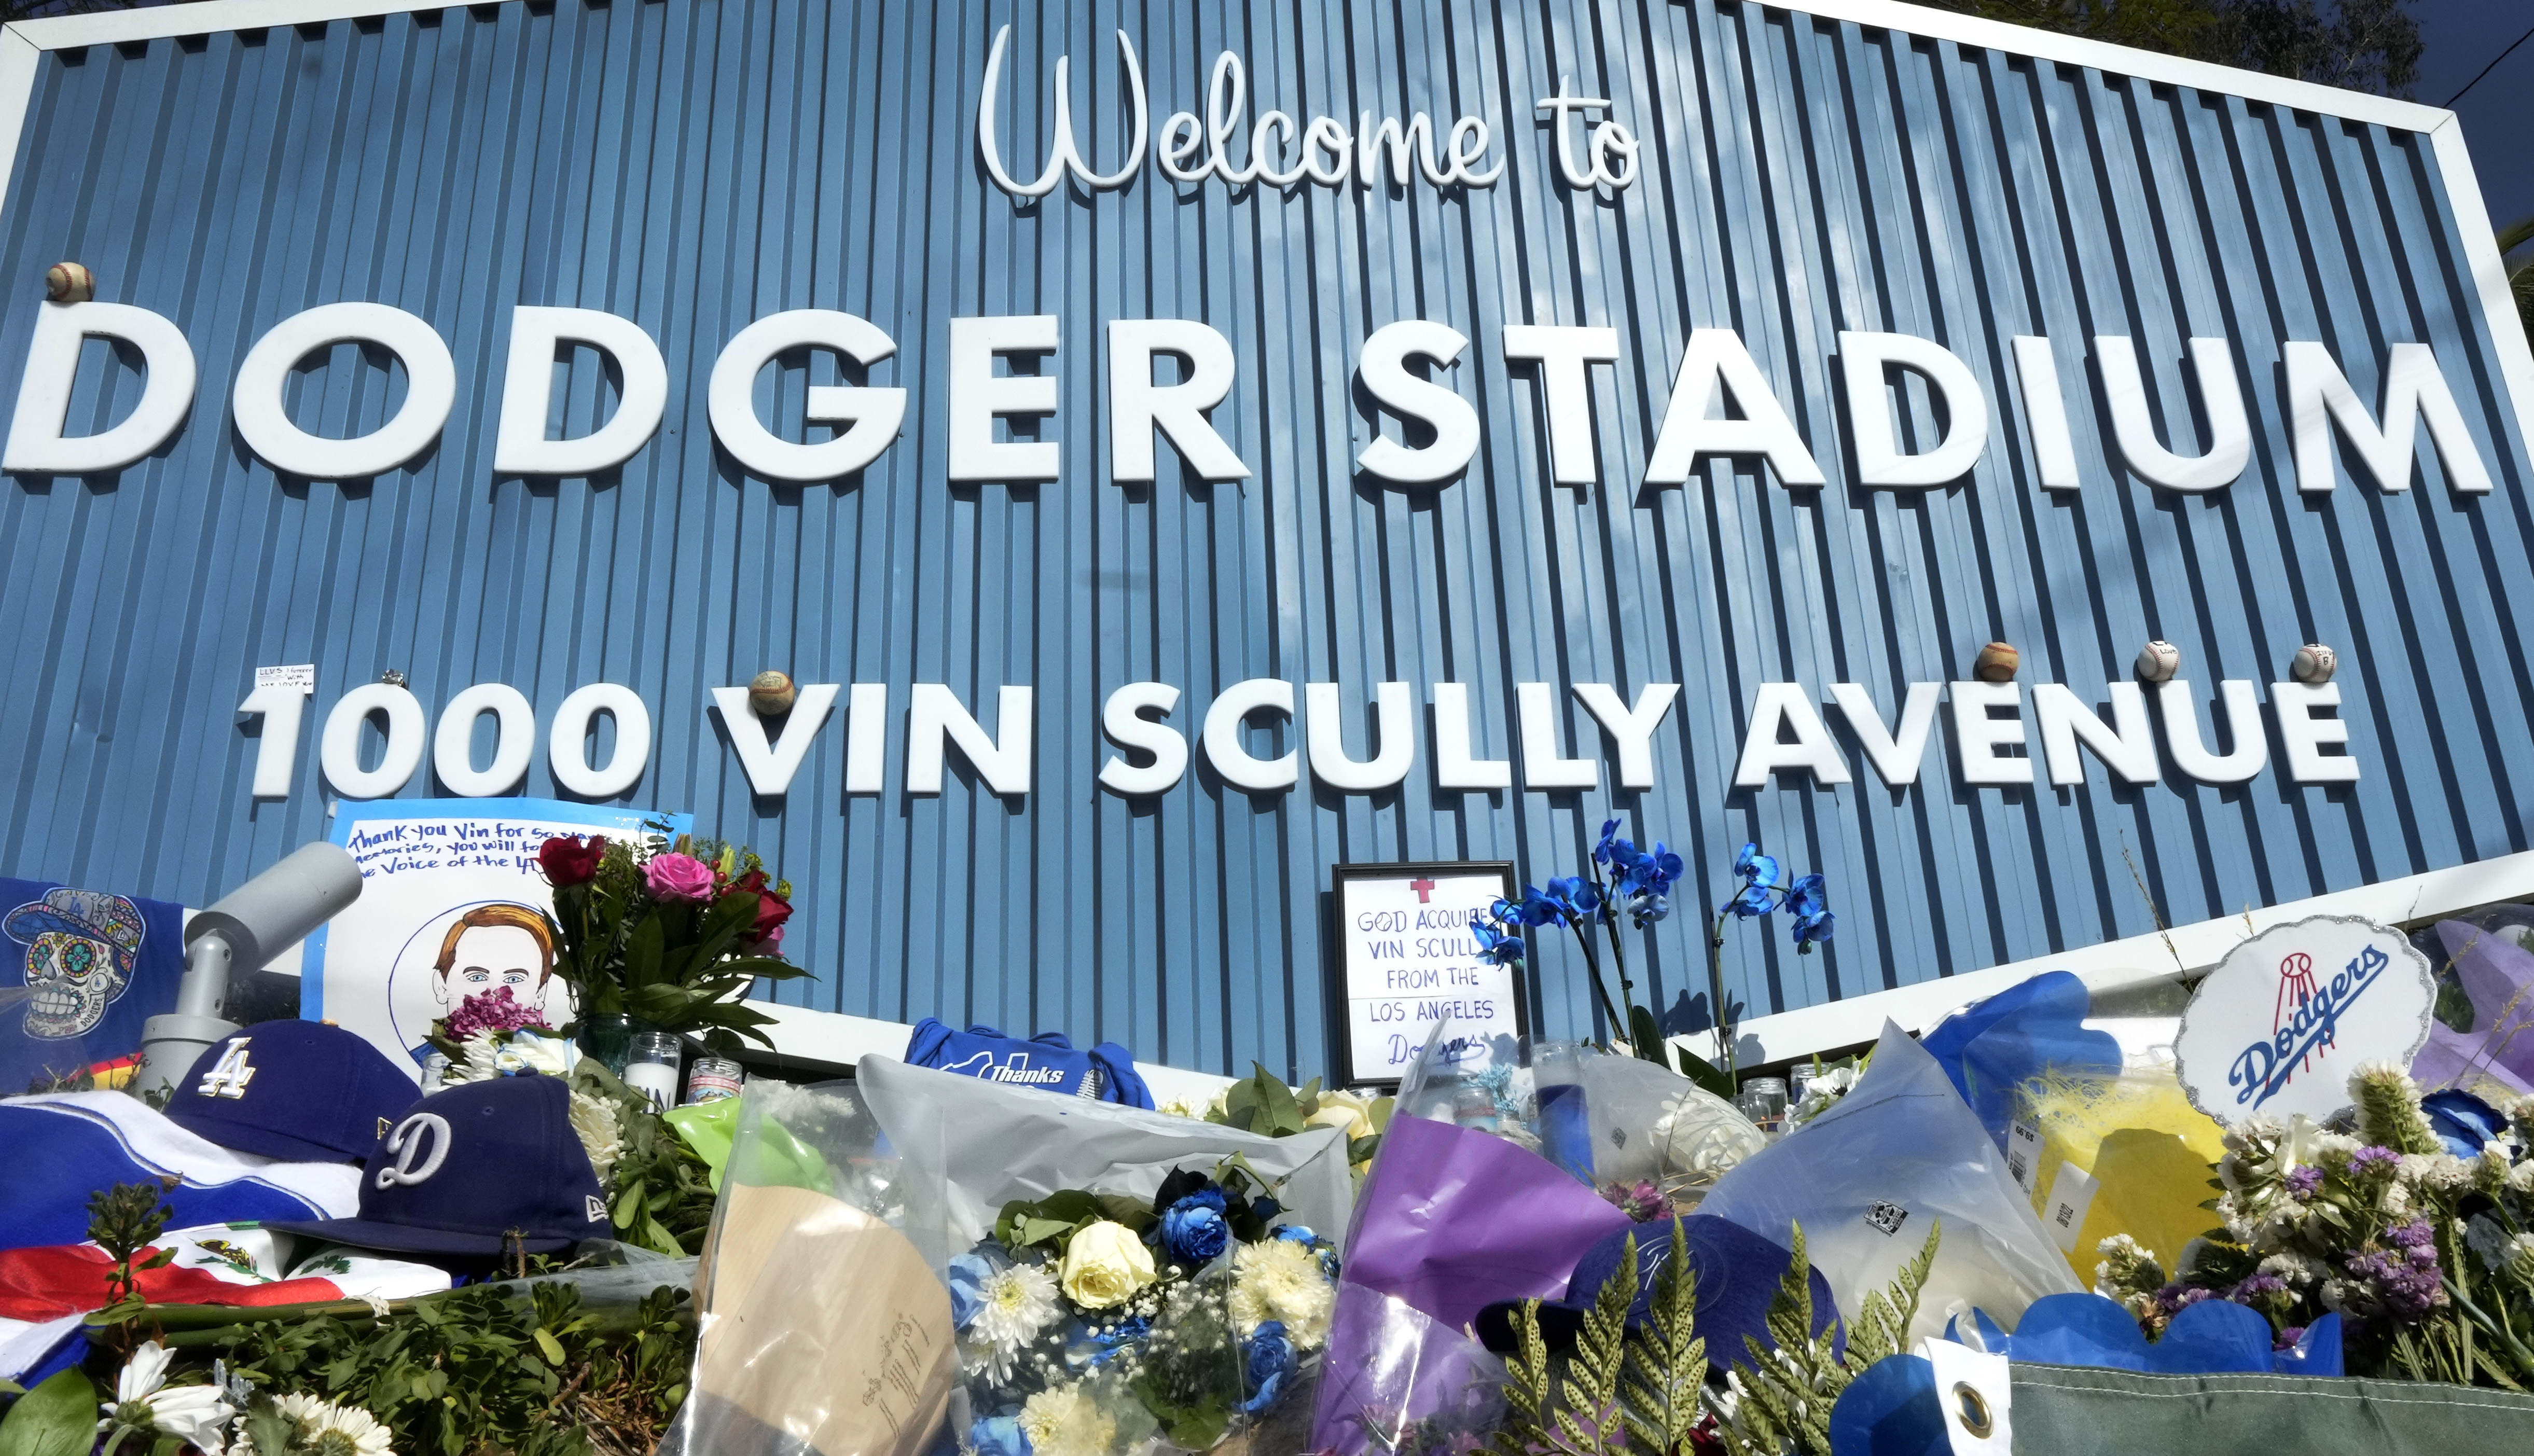 Fans come out to honor and celebrate the life of hall of fame broadcaster Vin Scully who passed away at the age of 94.